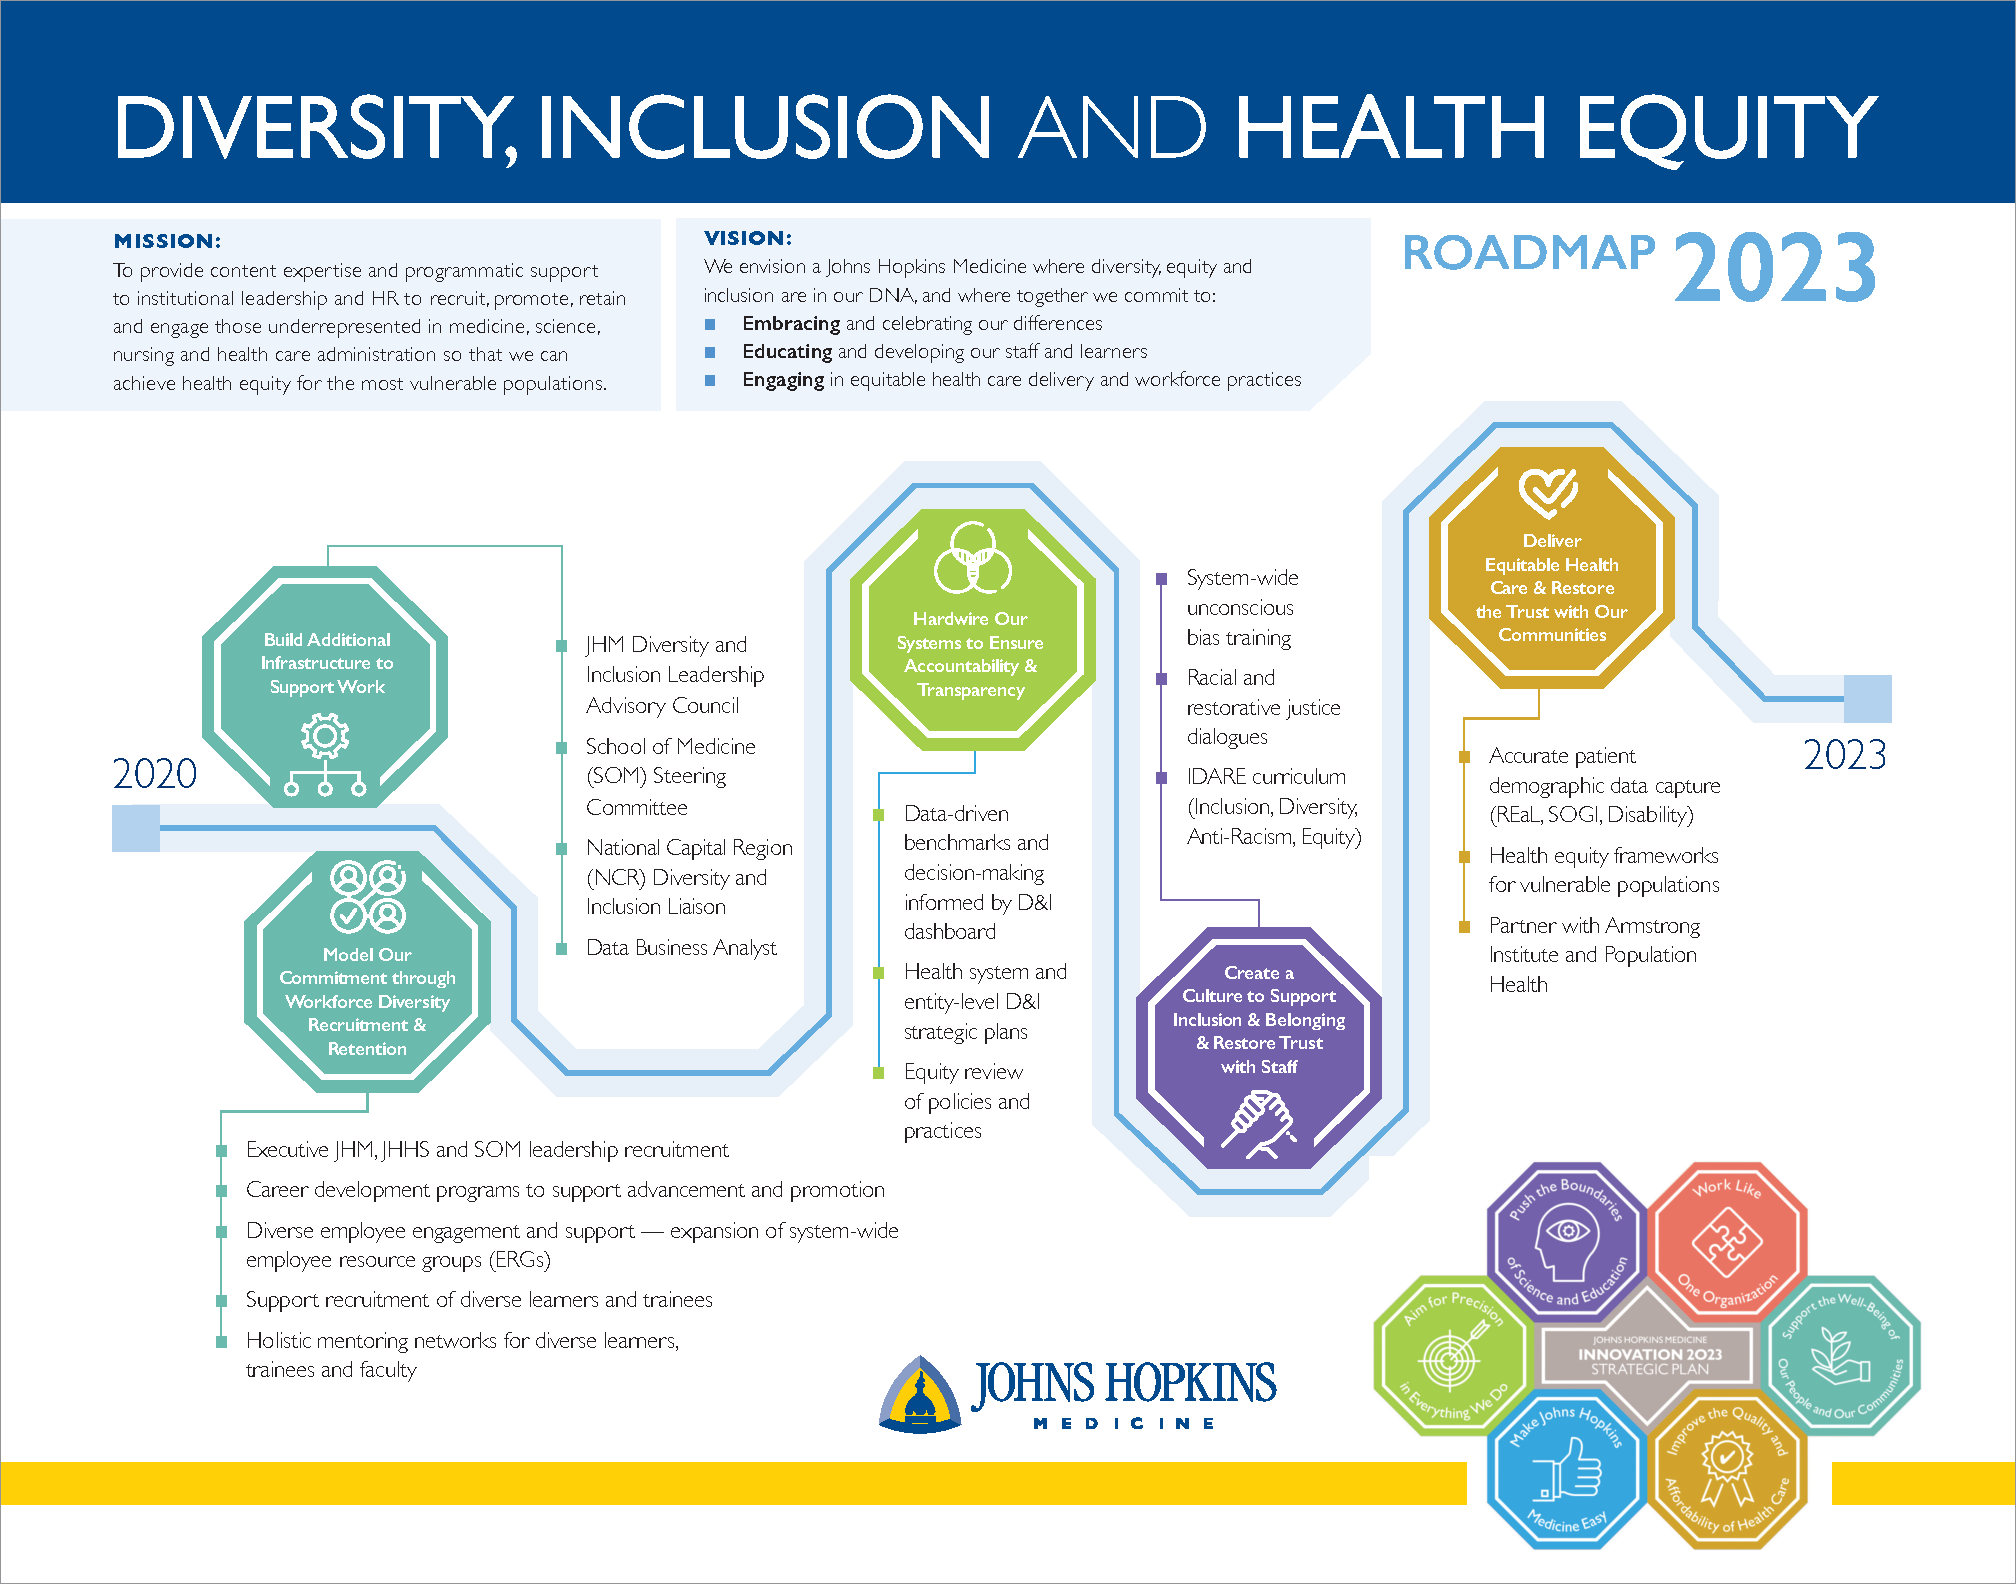 Office of Diversity, Inclusion and Health Equity Johns Hopkins Medicine